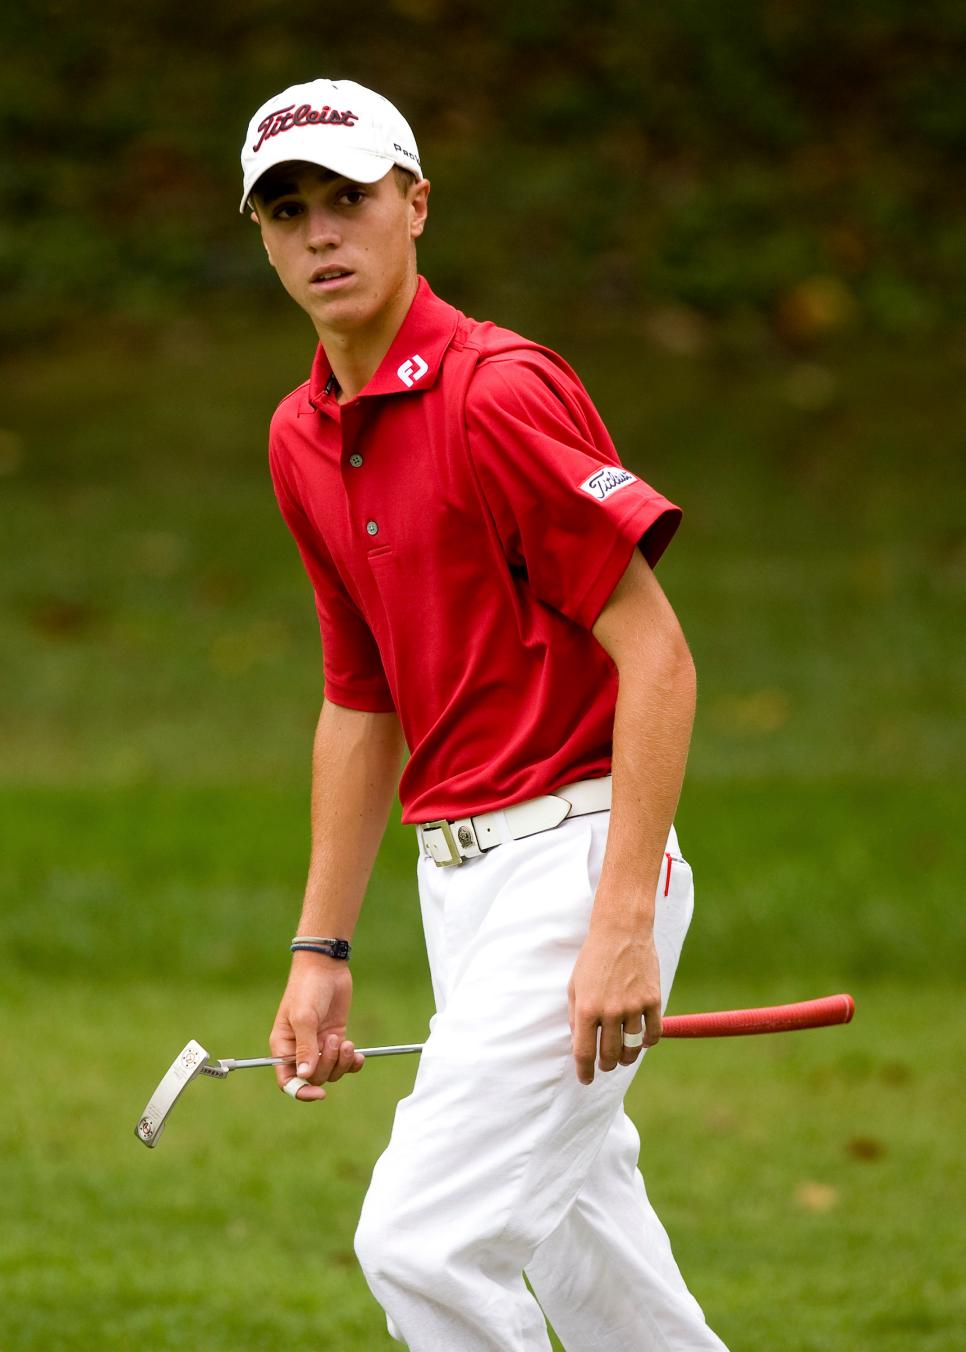 GREENSBORO, NC - AUGUST 22: Justin Thomas walks up the 10th hole after hitting his approach shot during the third round of the Wyndham Championship at Sedgefield Country Club  on August 22, 2009 in Greensboro, North Carolina. (Photo by Chris Keane/Getty Images)